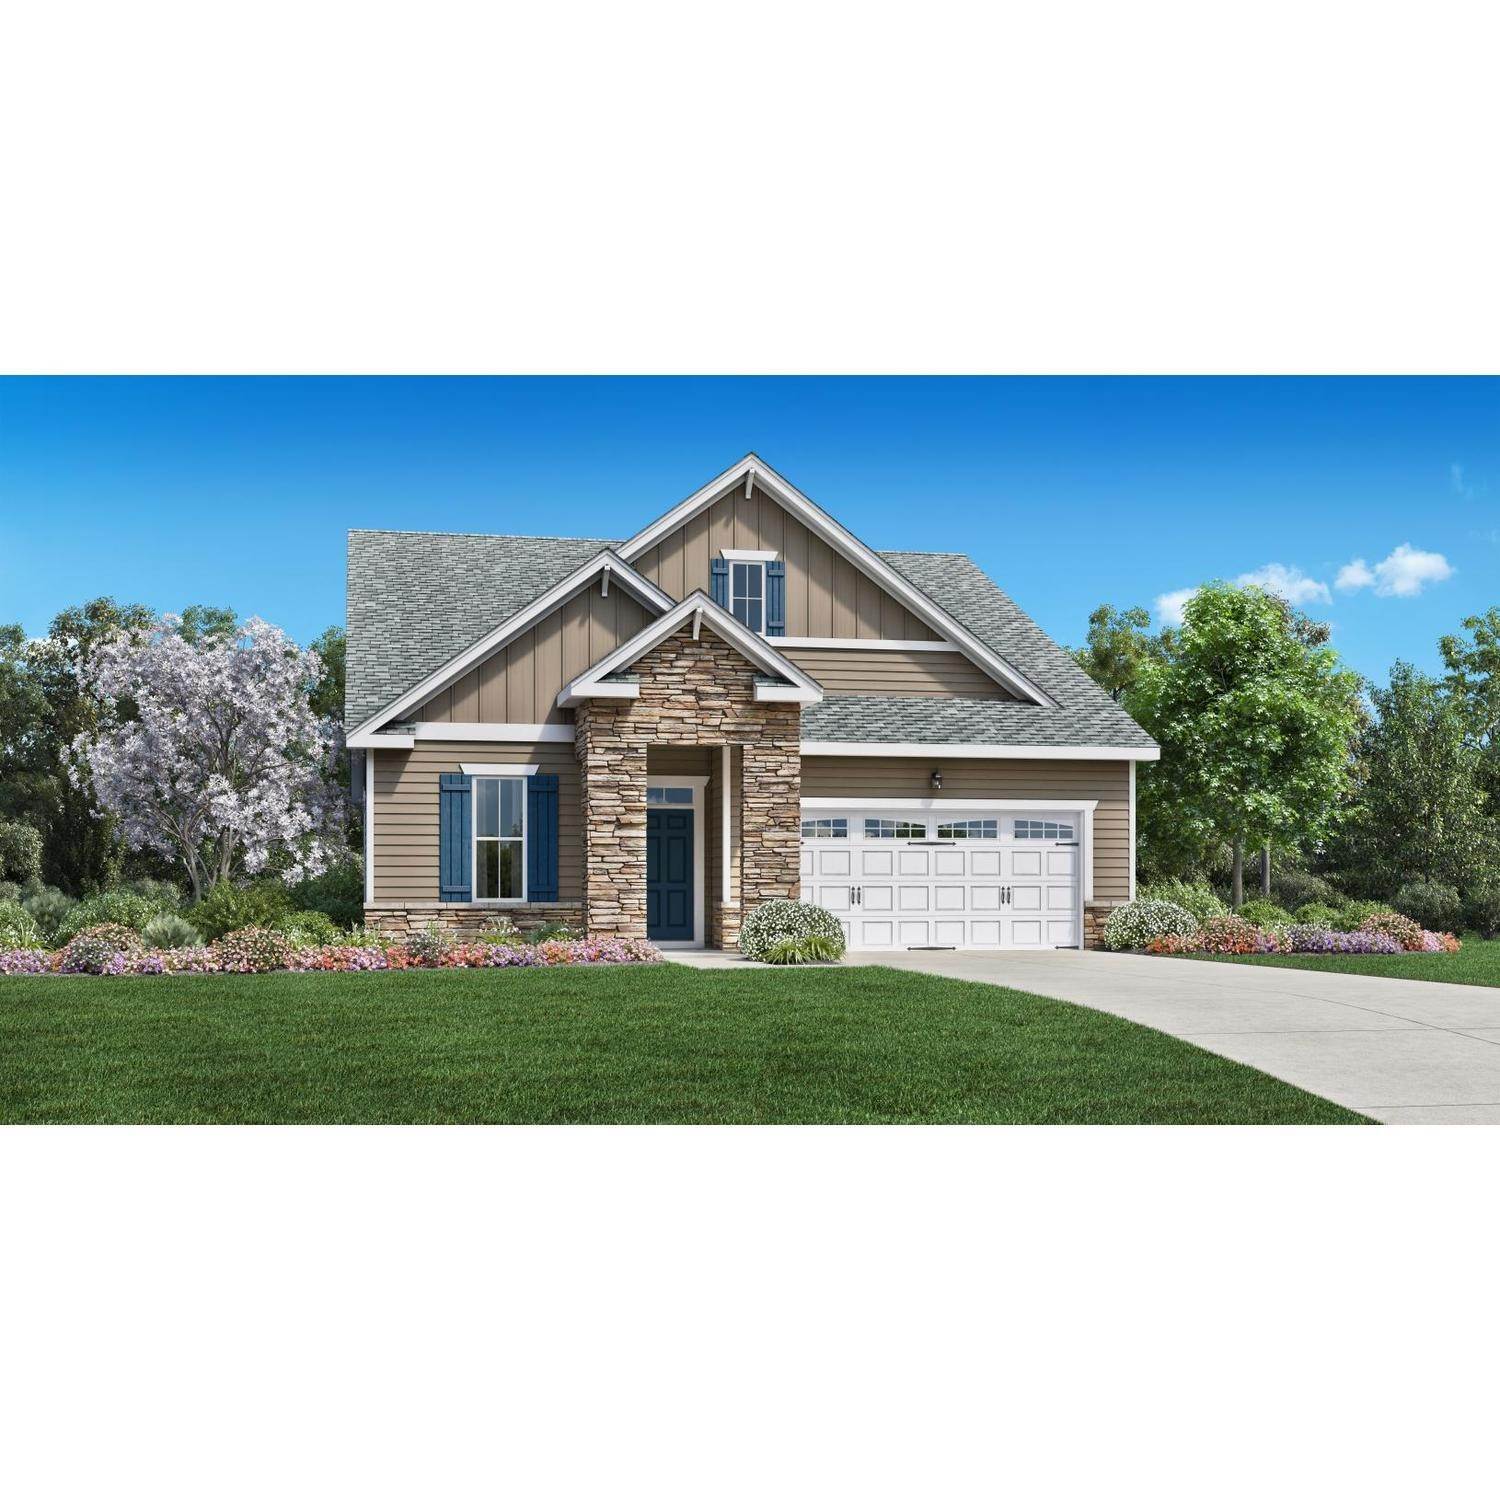 Single Family for Sale at Retreat At Cedar Crossing 3521 Olive Glen Dr, Apex, NC 27502